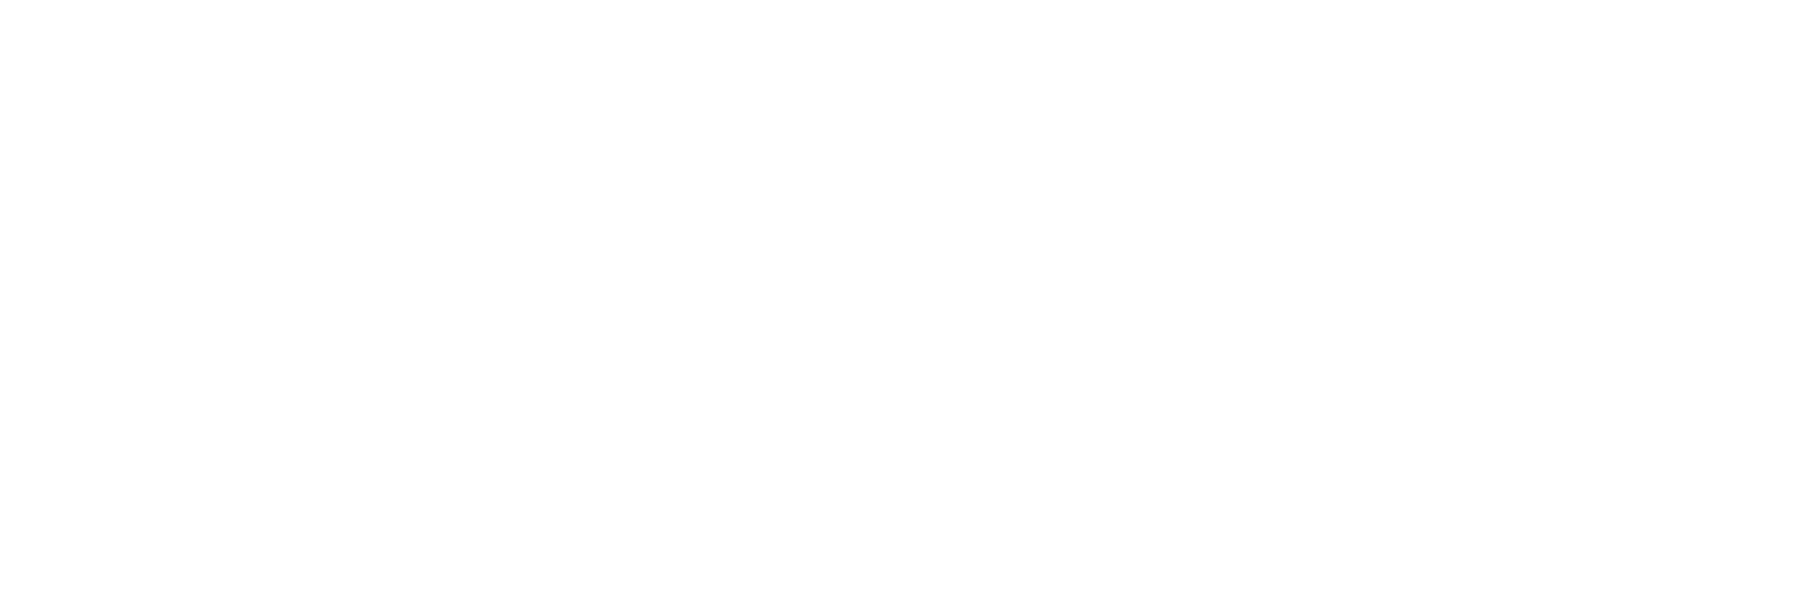 Pendrillons